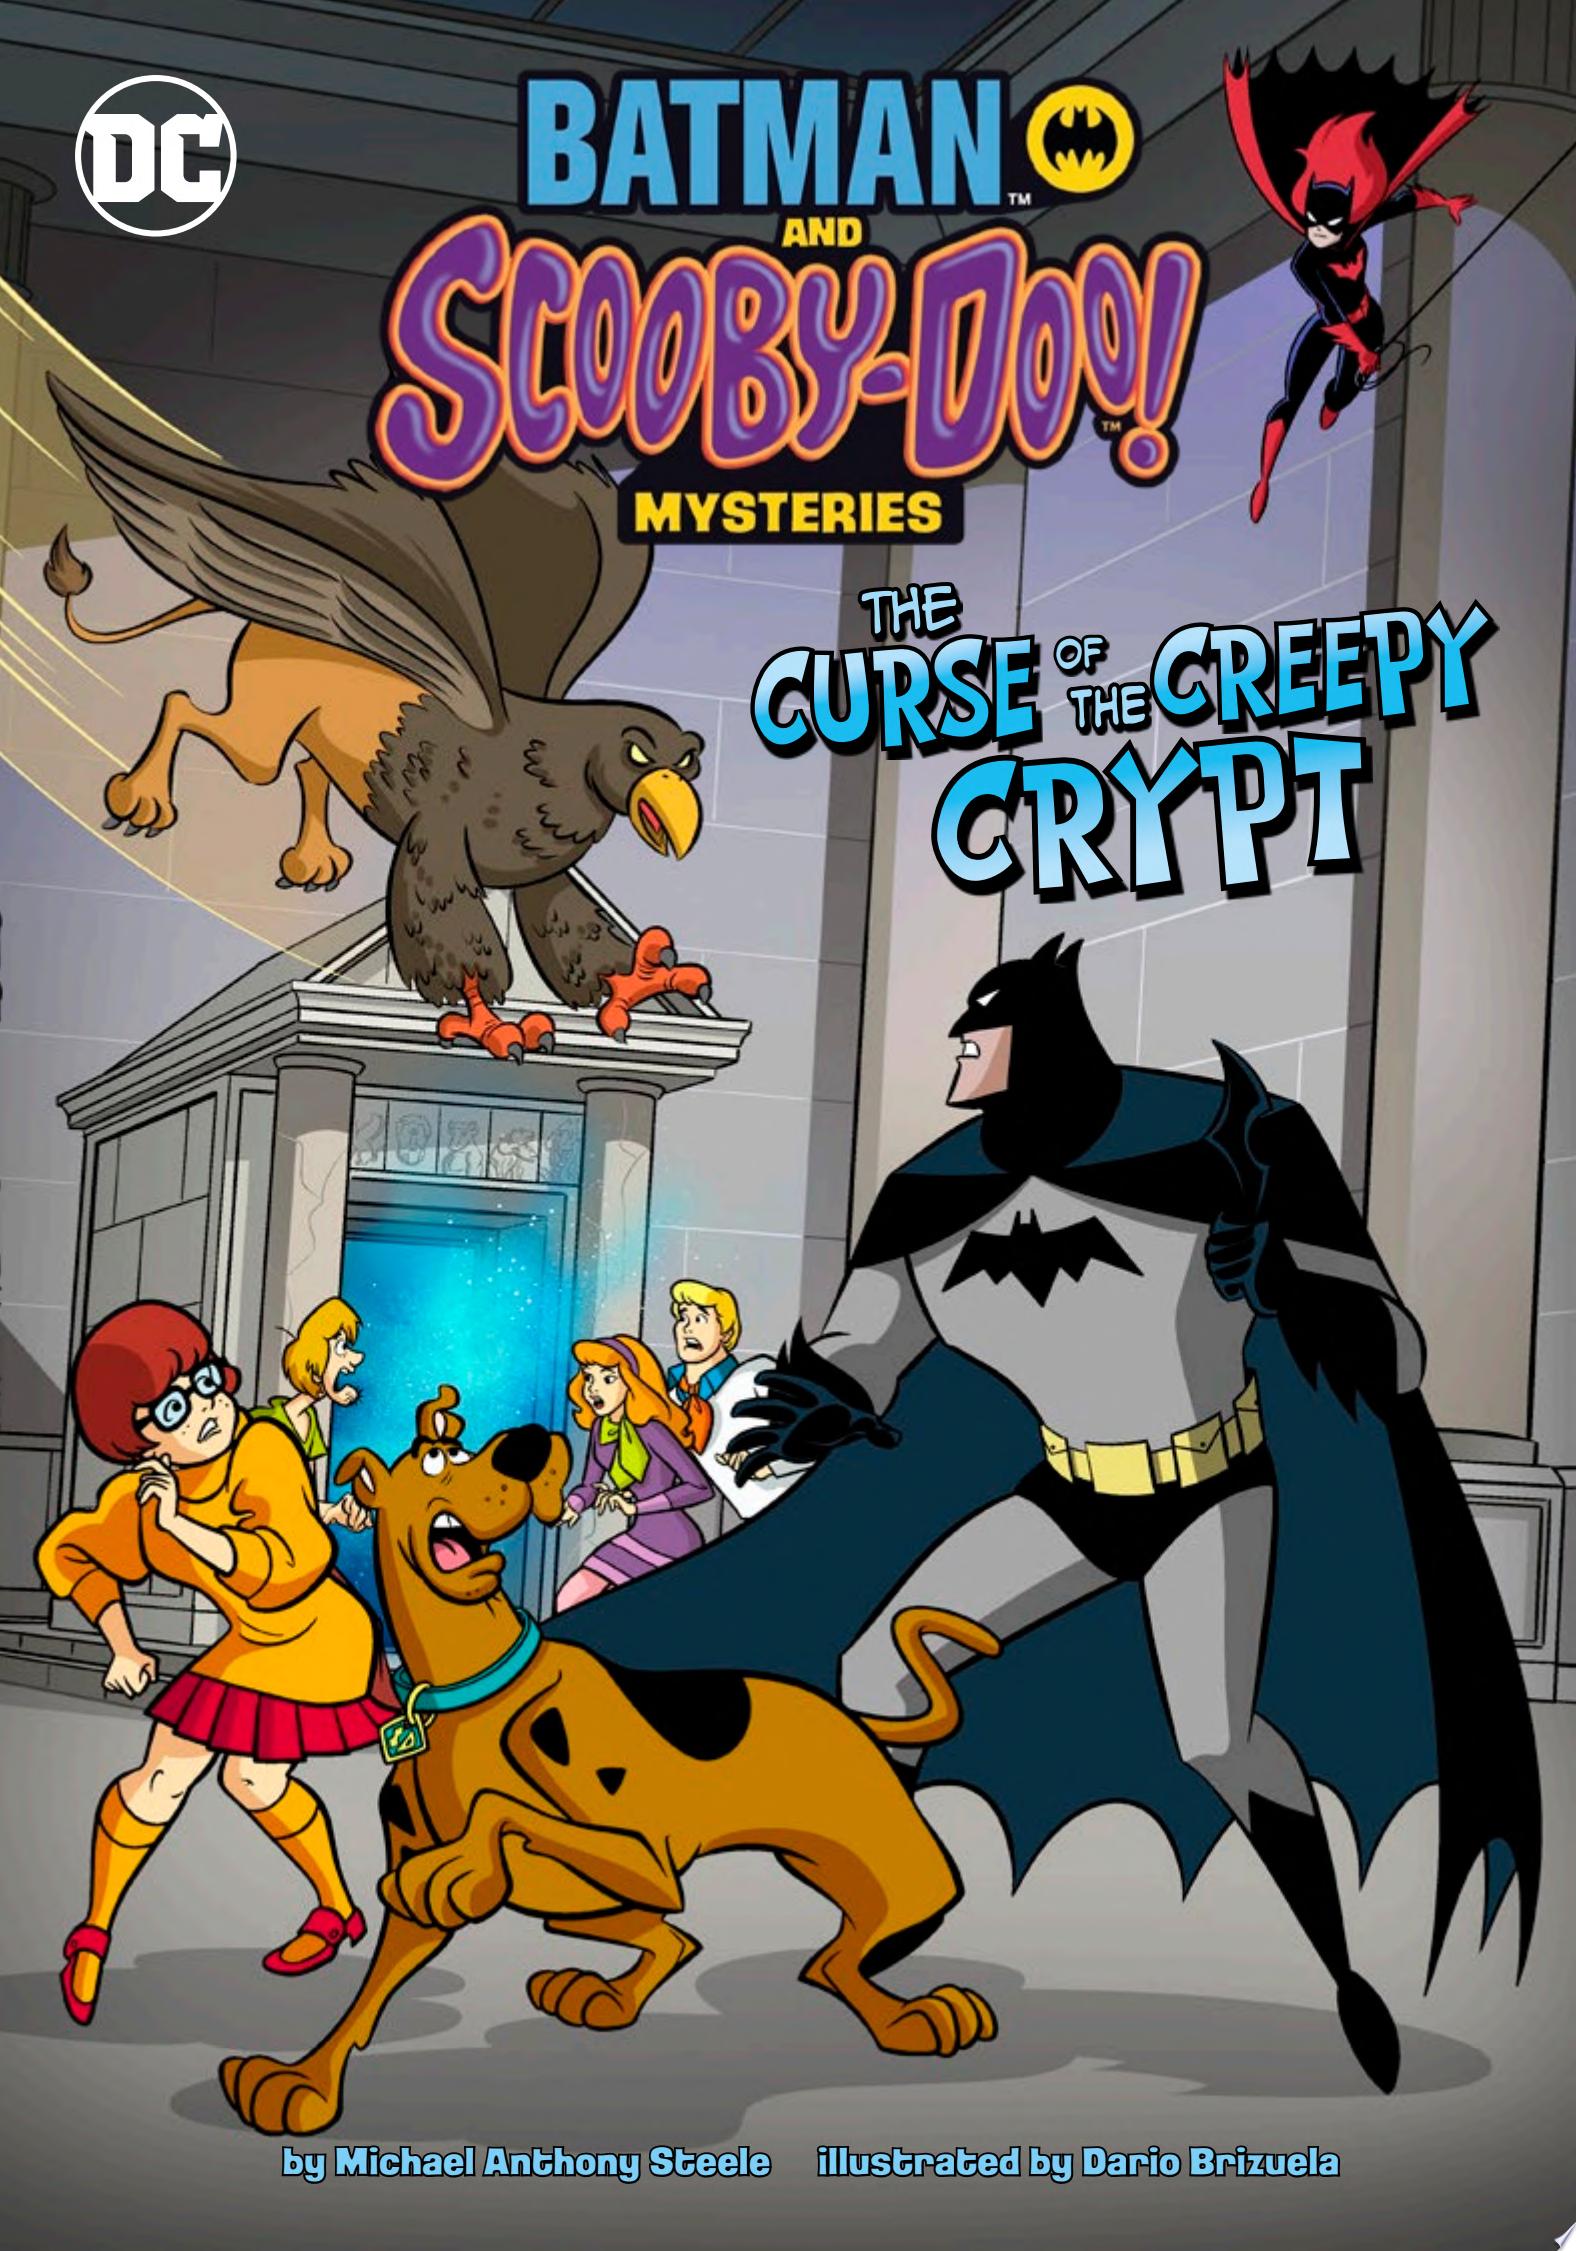 Image for "The Curse of the Creepy Crypt"